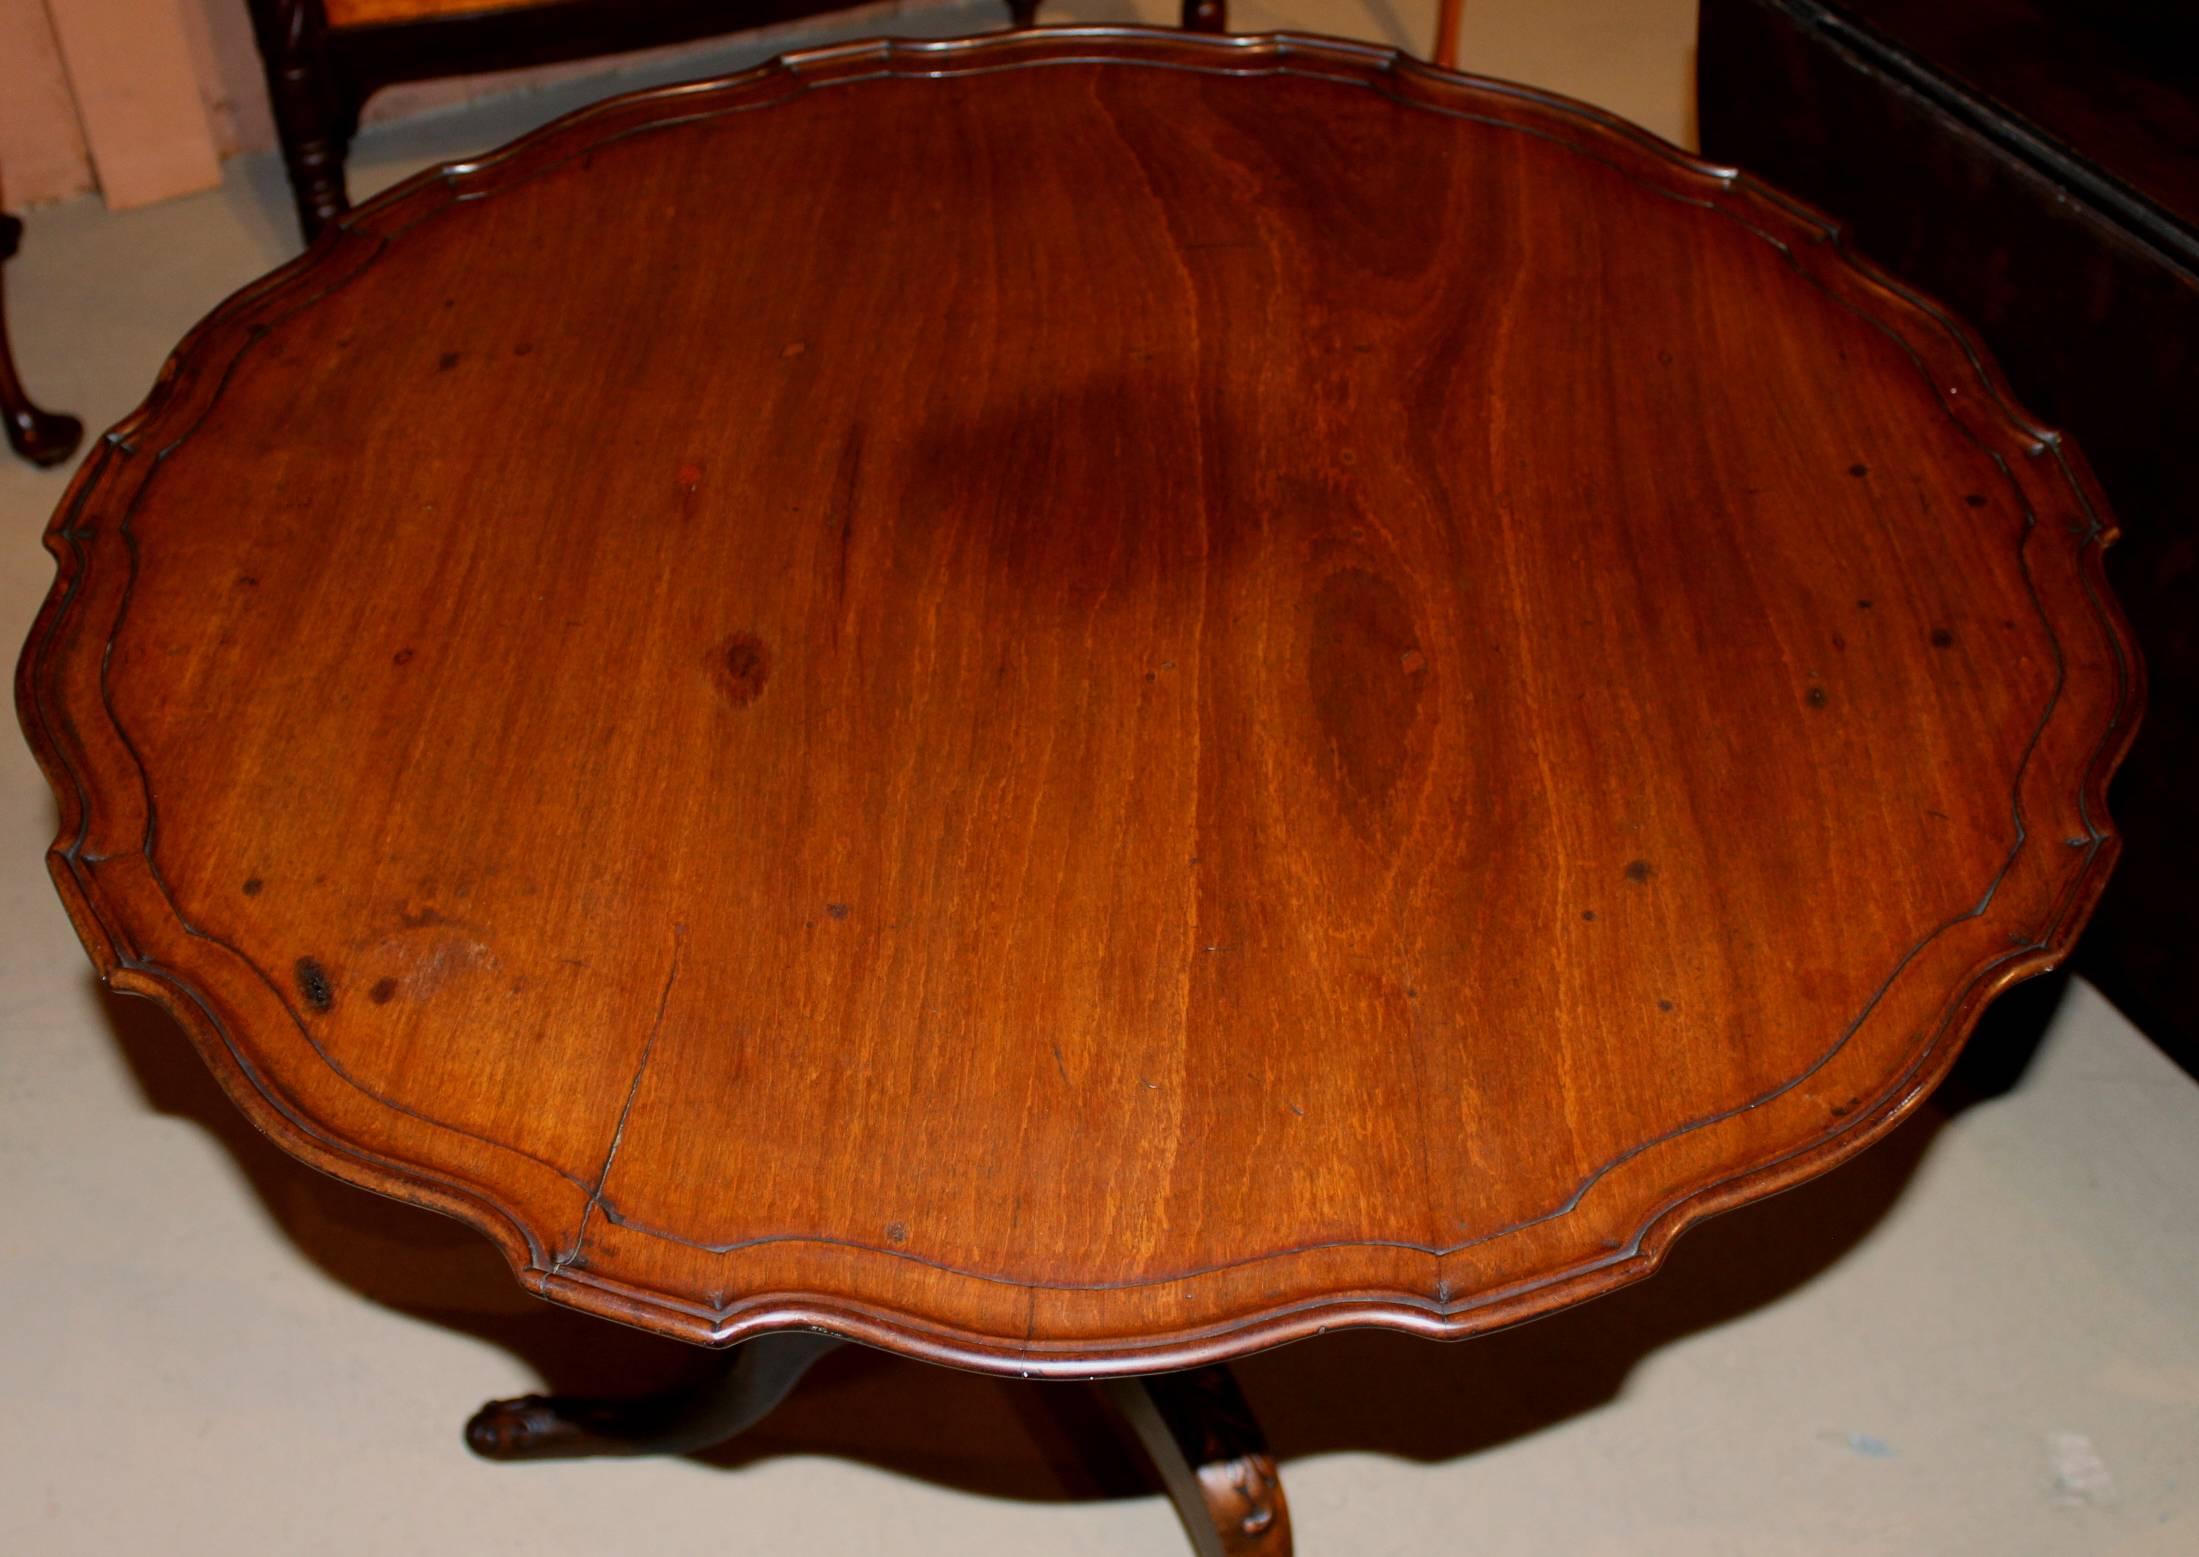 A fine example of a Georgian carved tilt-top tea table in mahogany with pie crust edge, with bold, foliate carved acanthus pedestal and cabriole legs, terminating with carved pad feet, 18th century English, with its original locking mechanism. Very